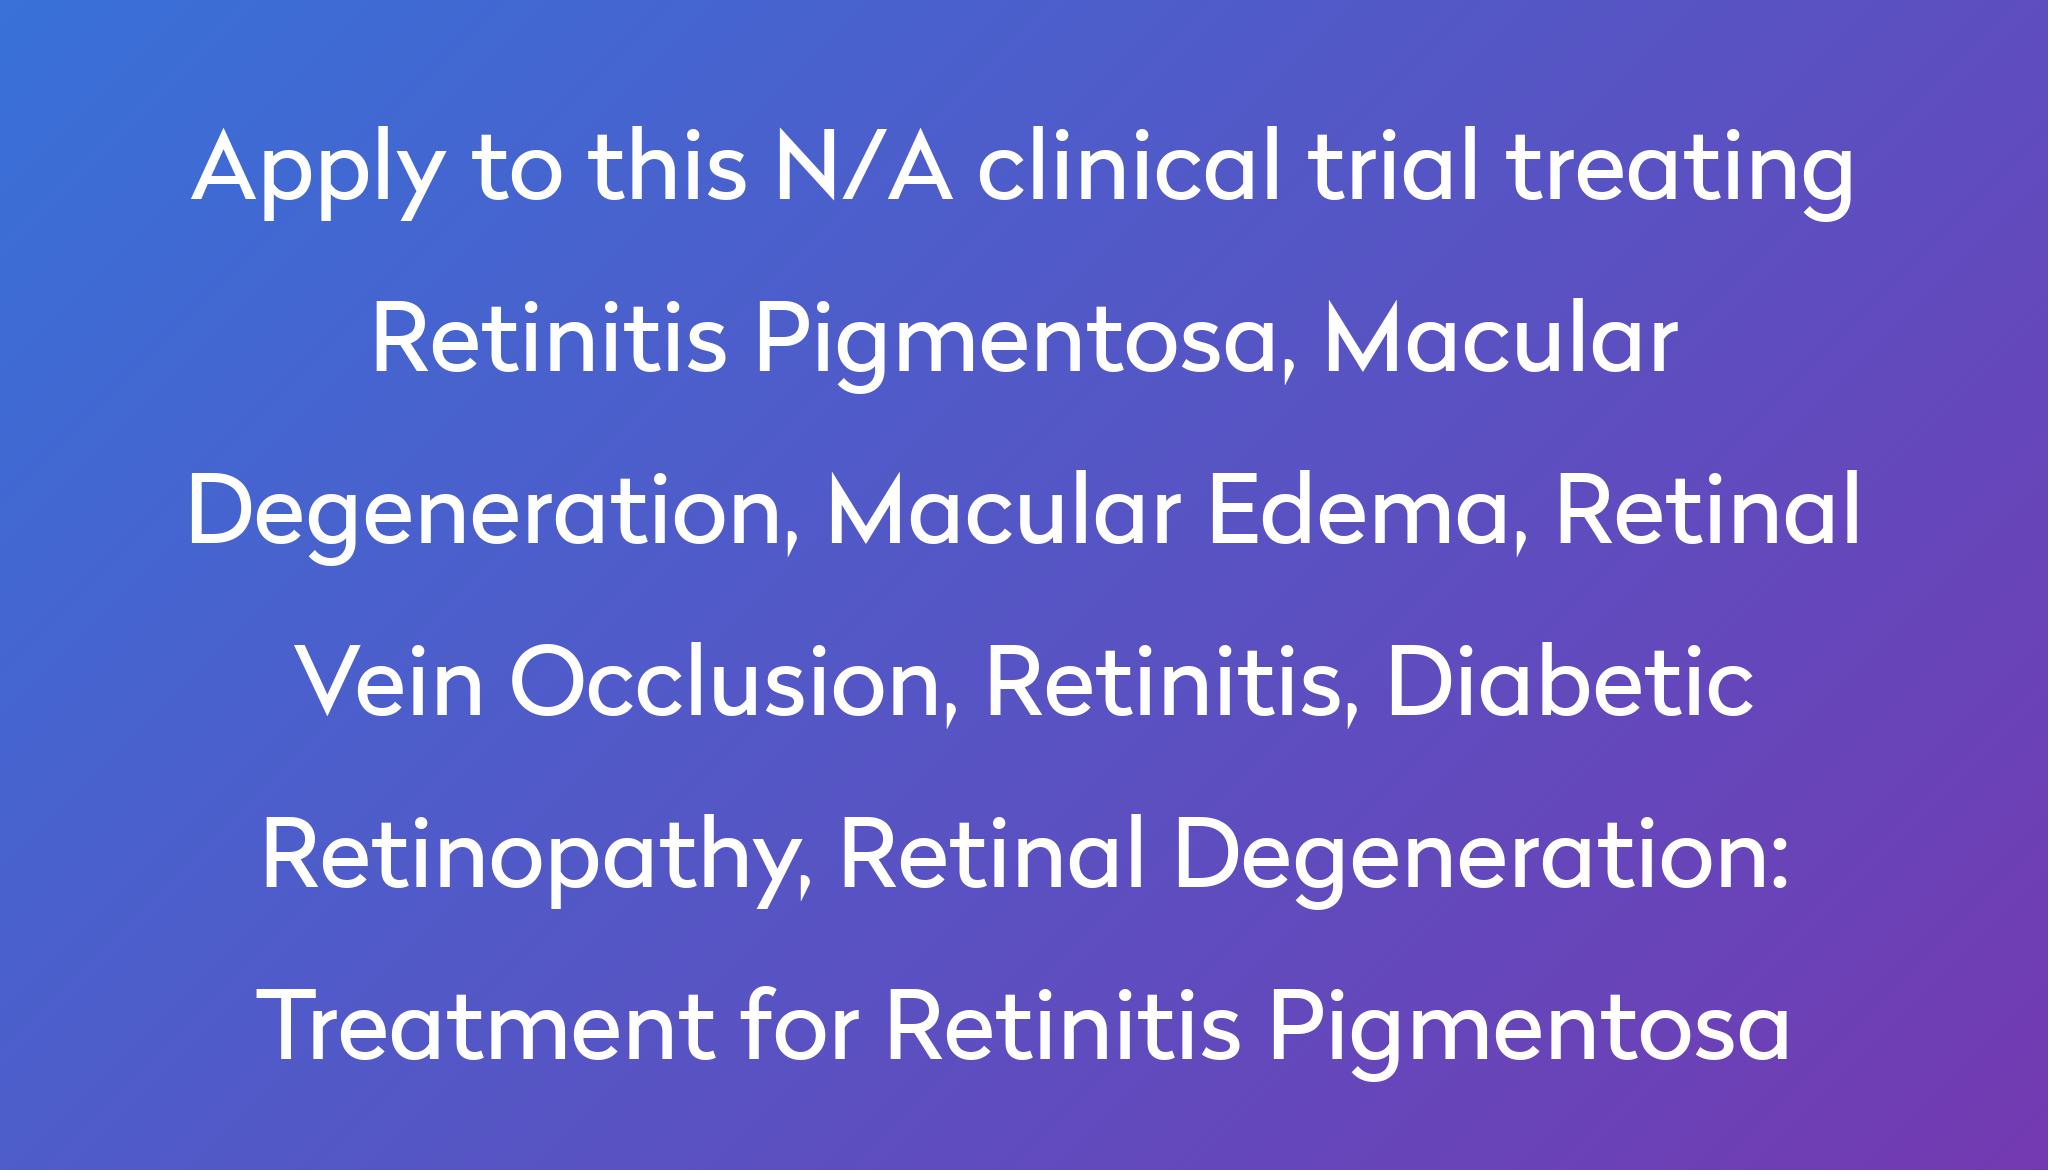 Treatment for Retinitis Pigmentosa Clinical Trial Power